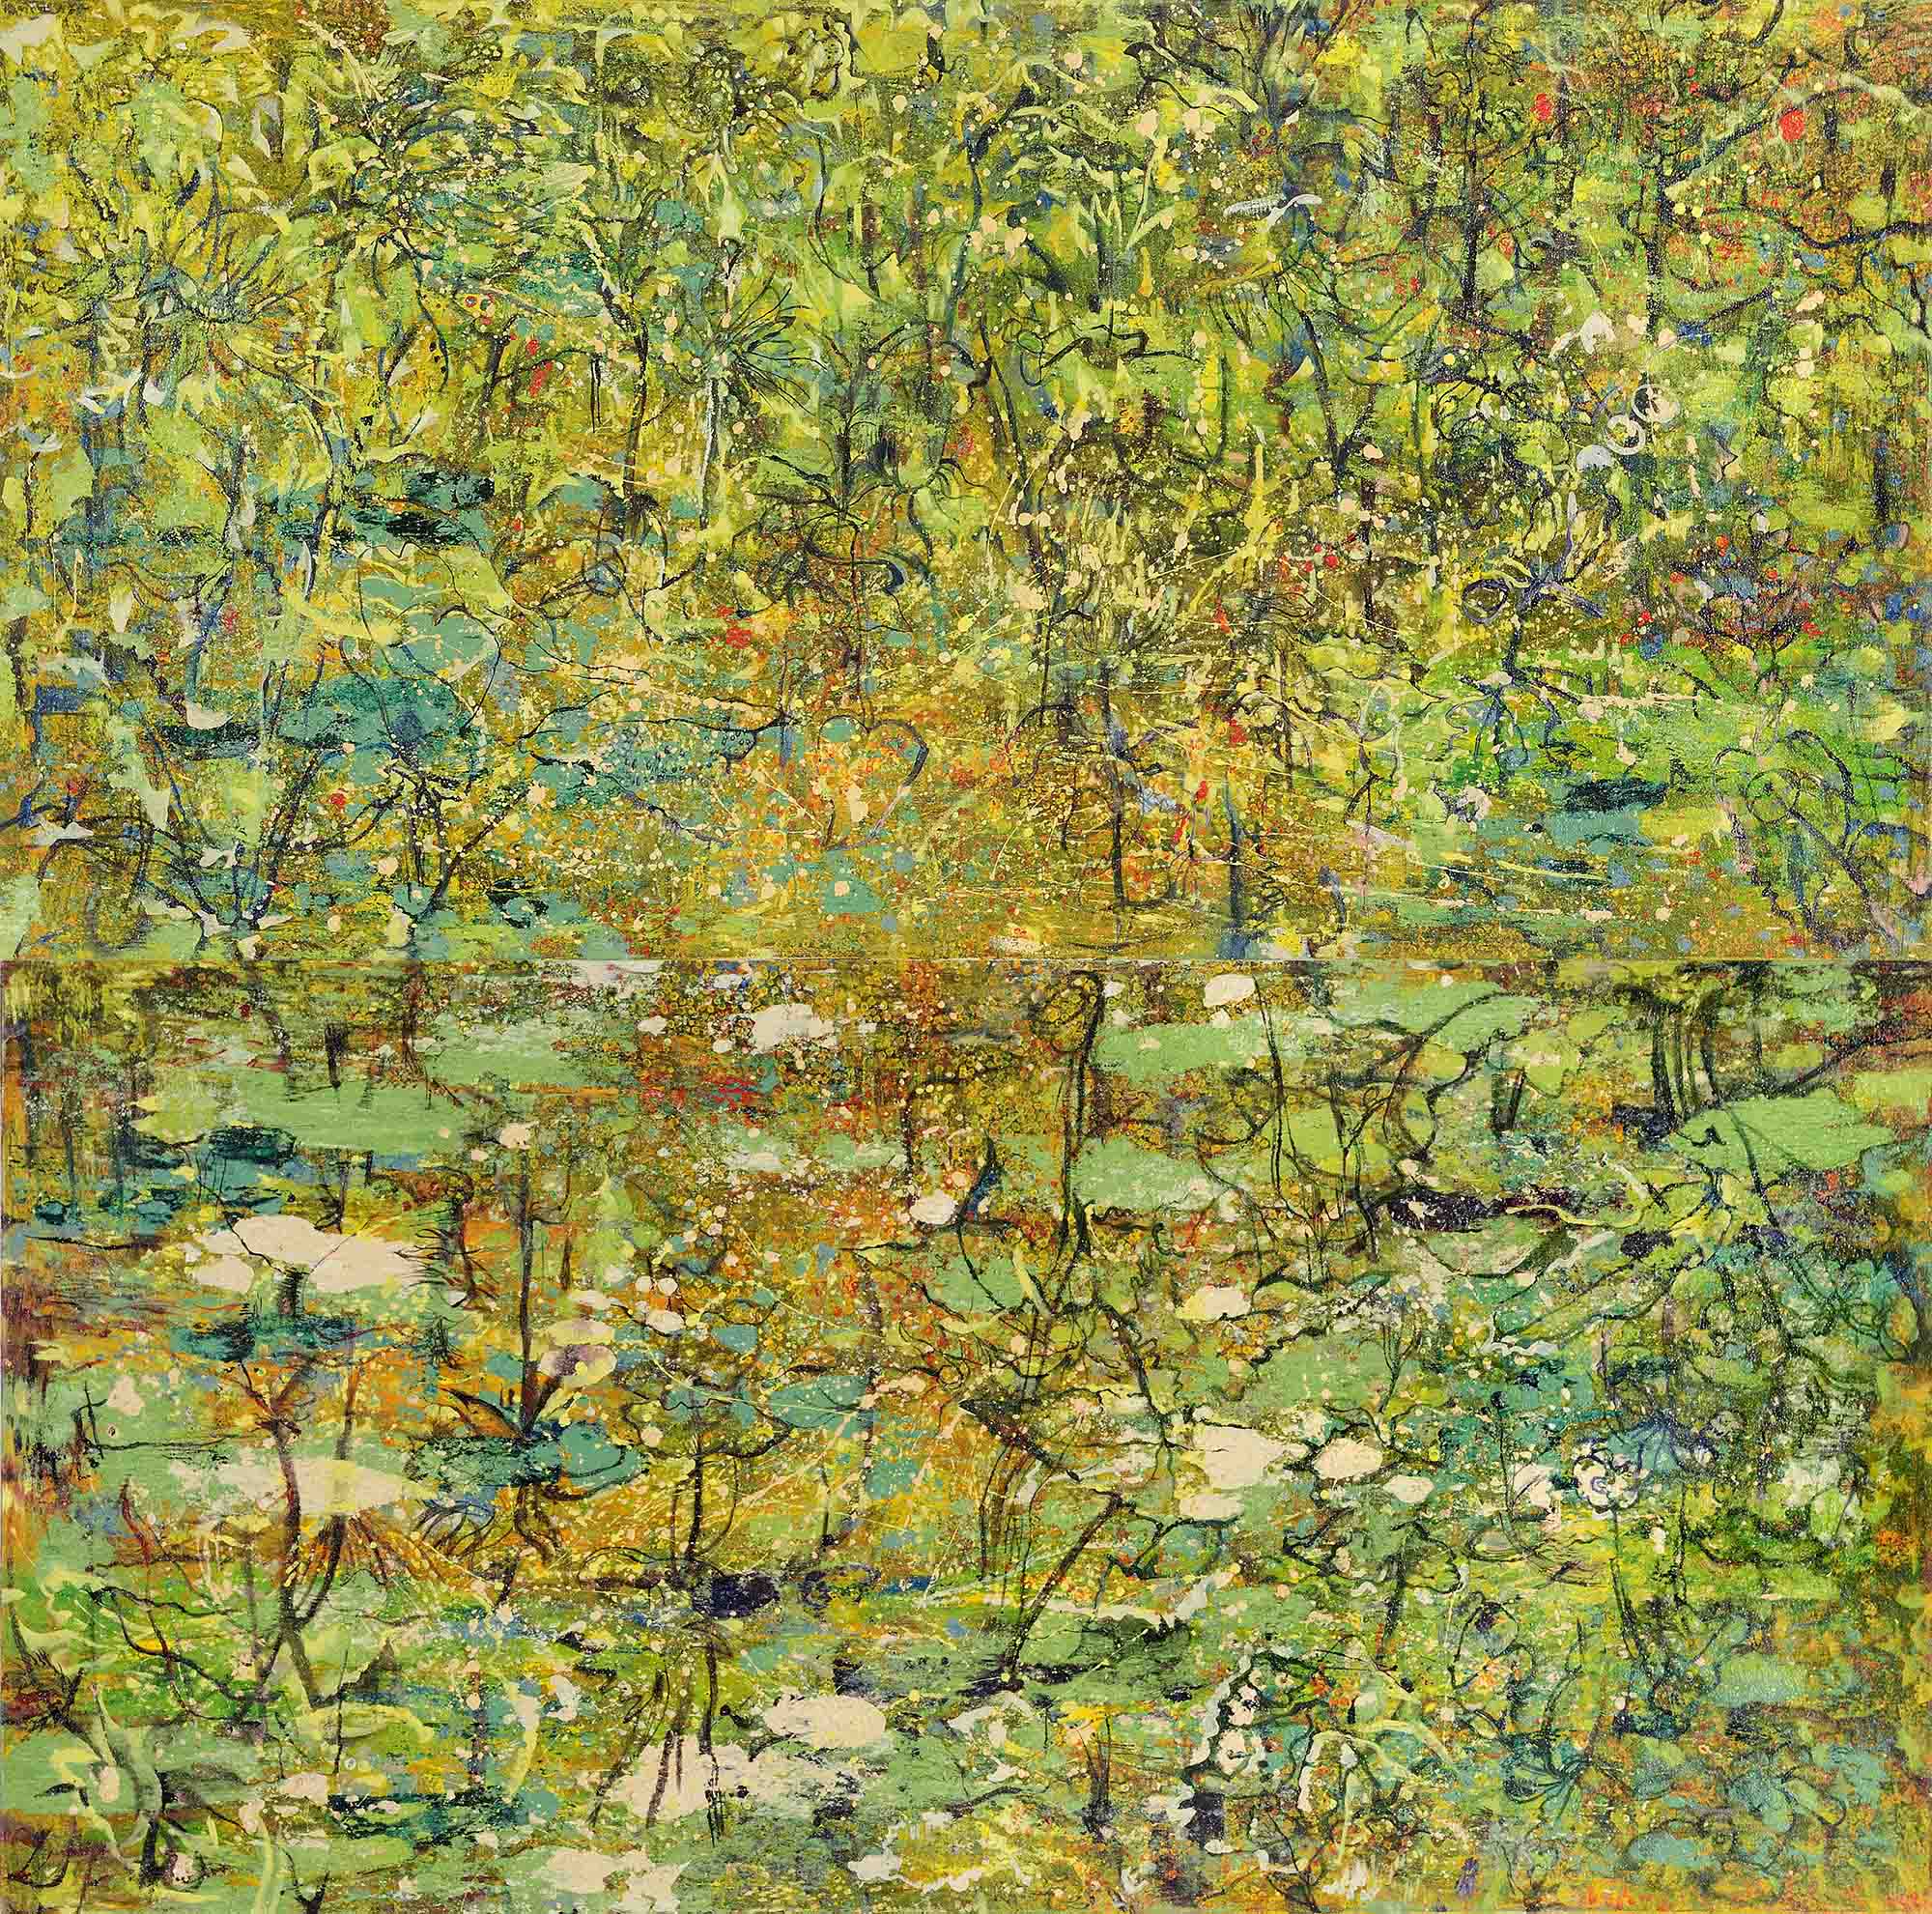 Yau Bee Ling - Living Pond (2019) Combined Oil and sand medium on canvas; 153cm x 306cm (Diptych) bottom